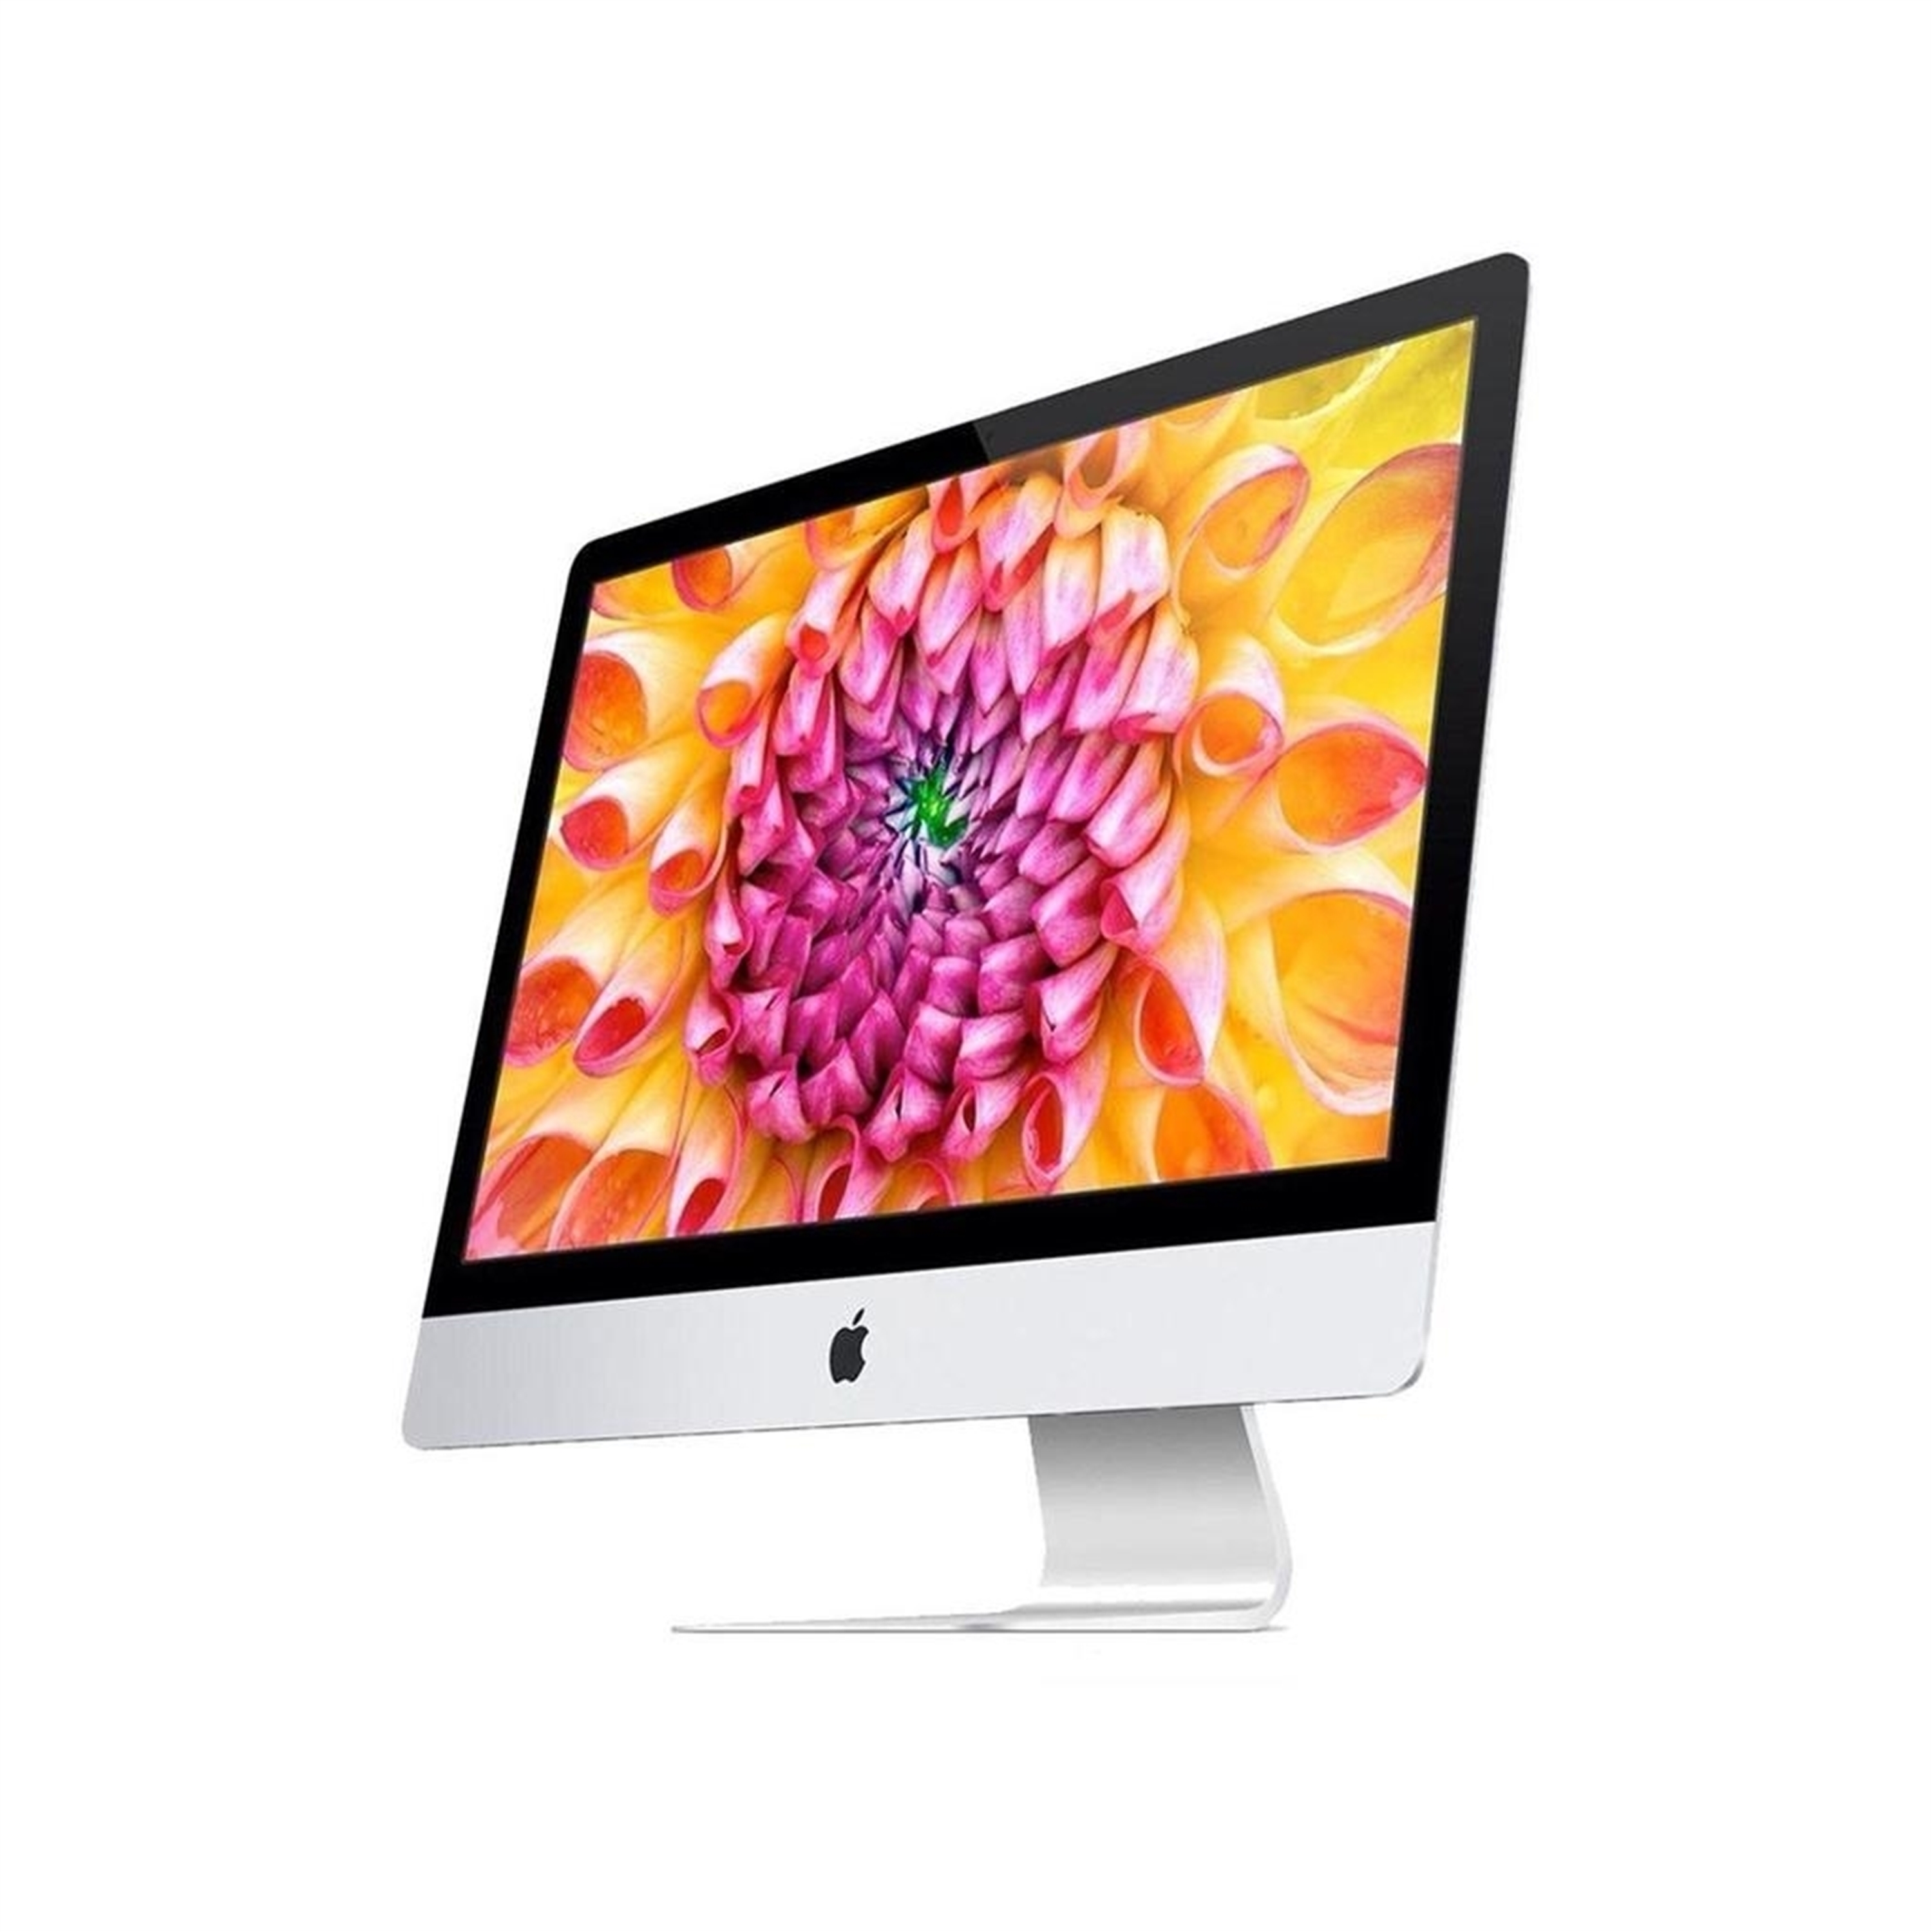 Apple iMac MK142LL/A 21.5" 8GB 1TB Core™ i5-5250U 1.6GHz Mac OSX,&nbsp;Silver (Used) - image 1 of 3